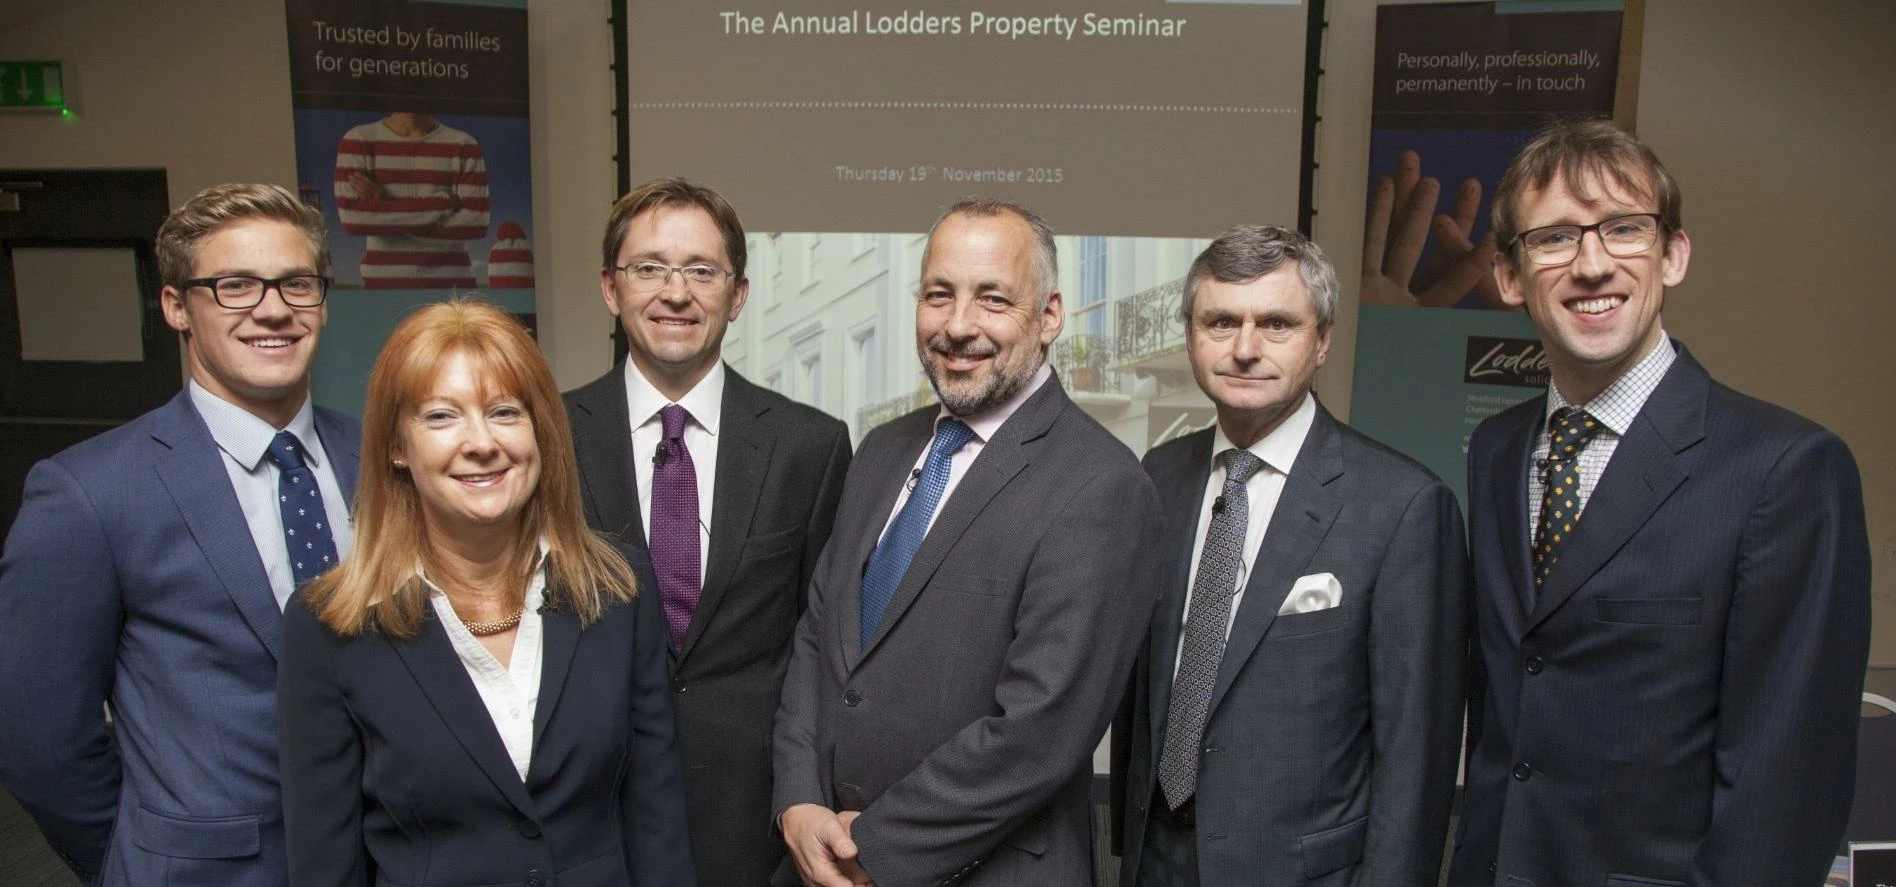 Speakers at law firm Lodders' Annual Property Seminar in Stratford upon Avon